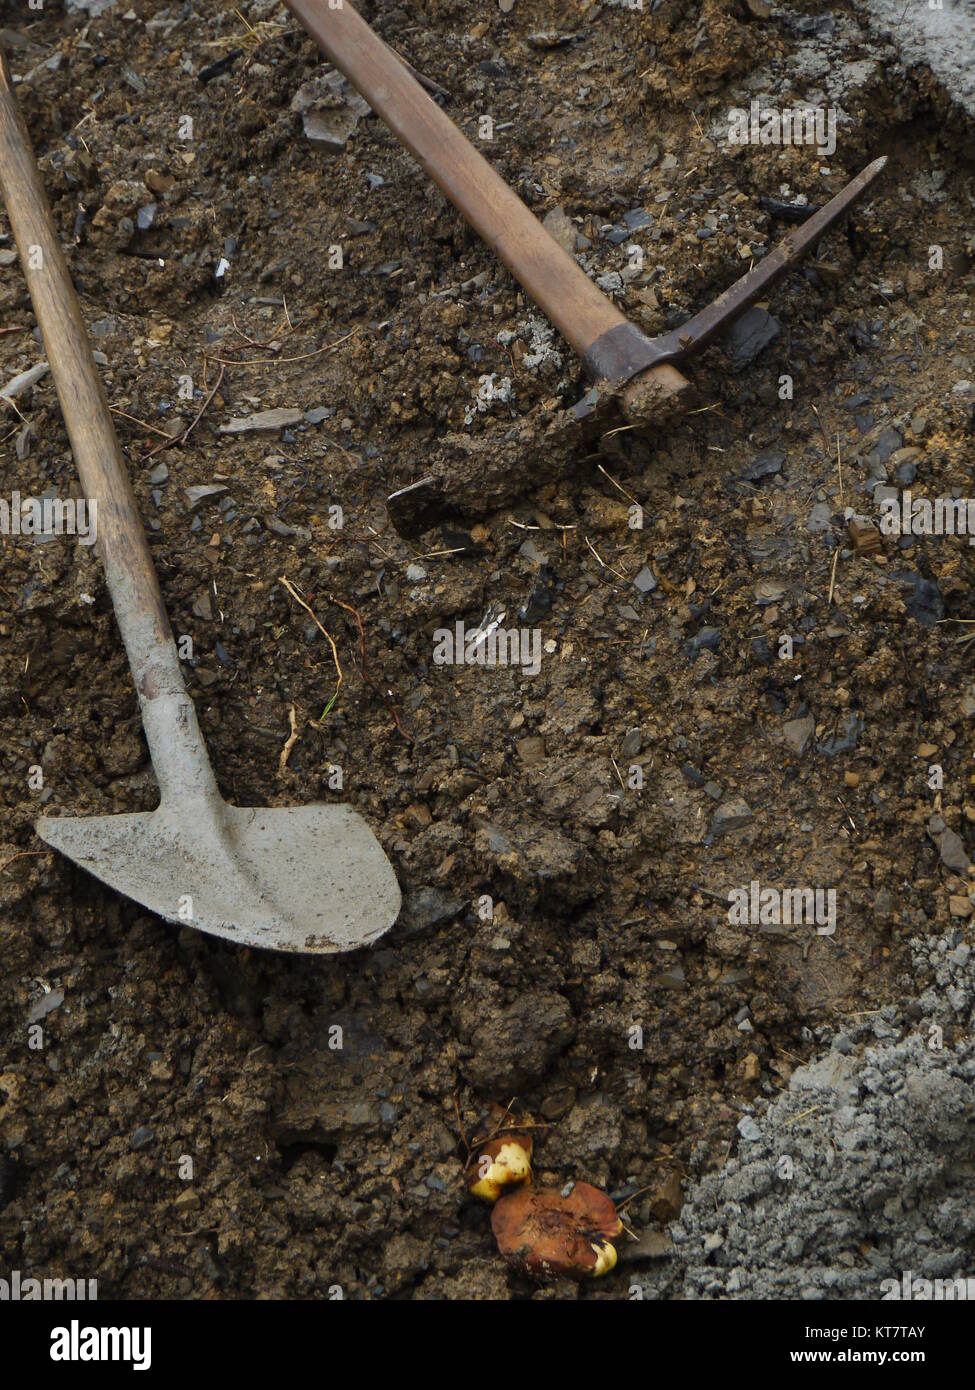 Closeup of a shovel digging into pile of building sand Stock Photo